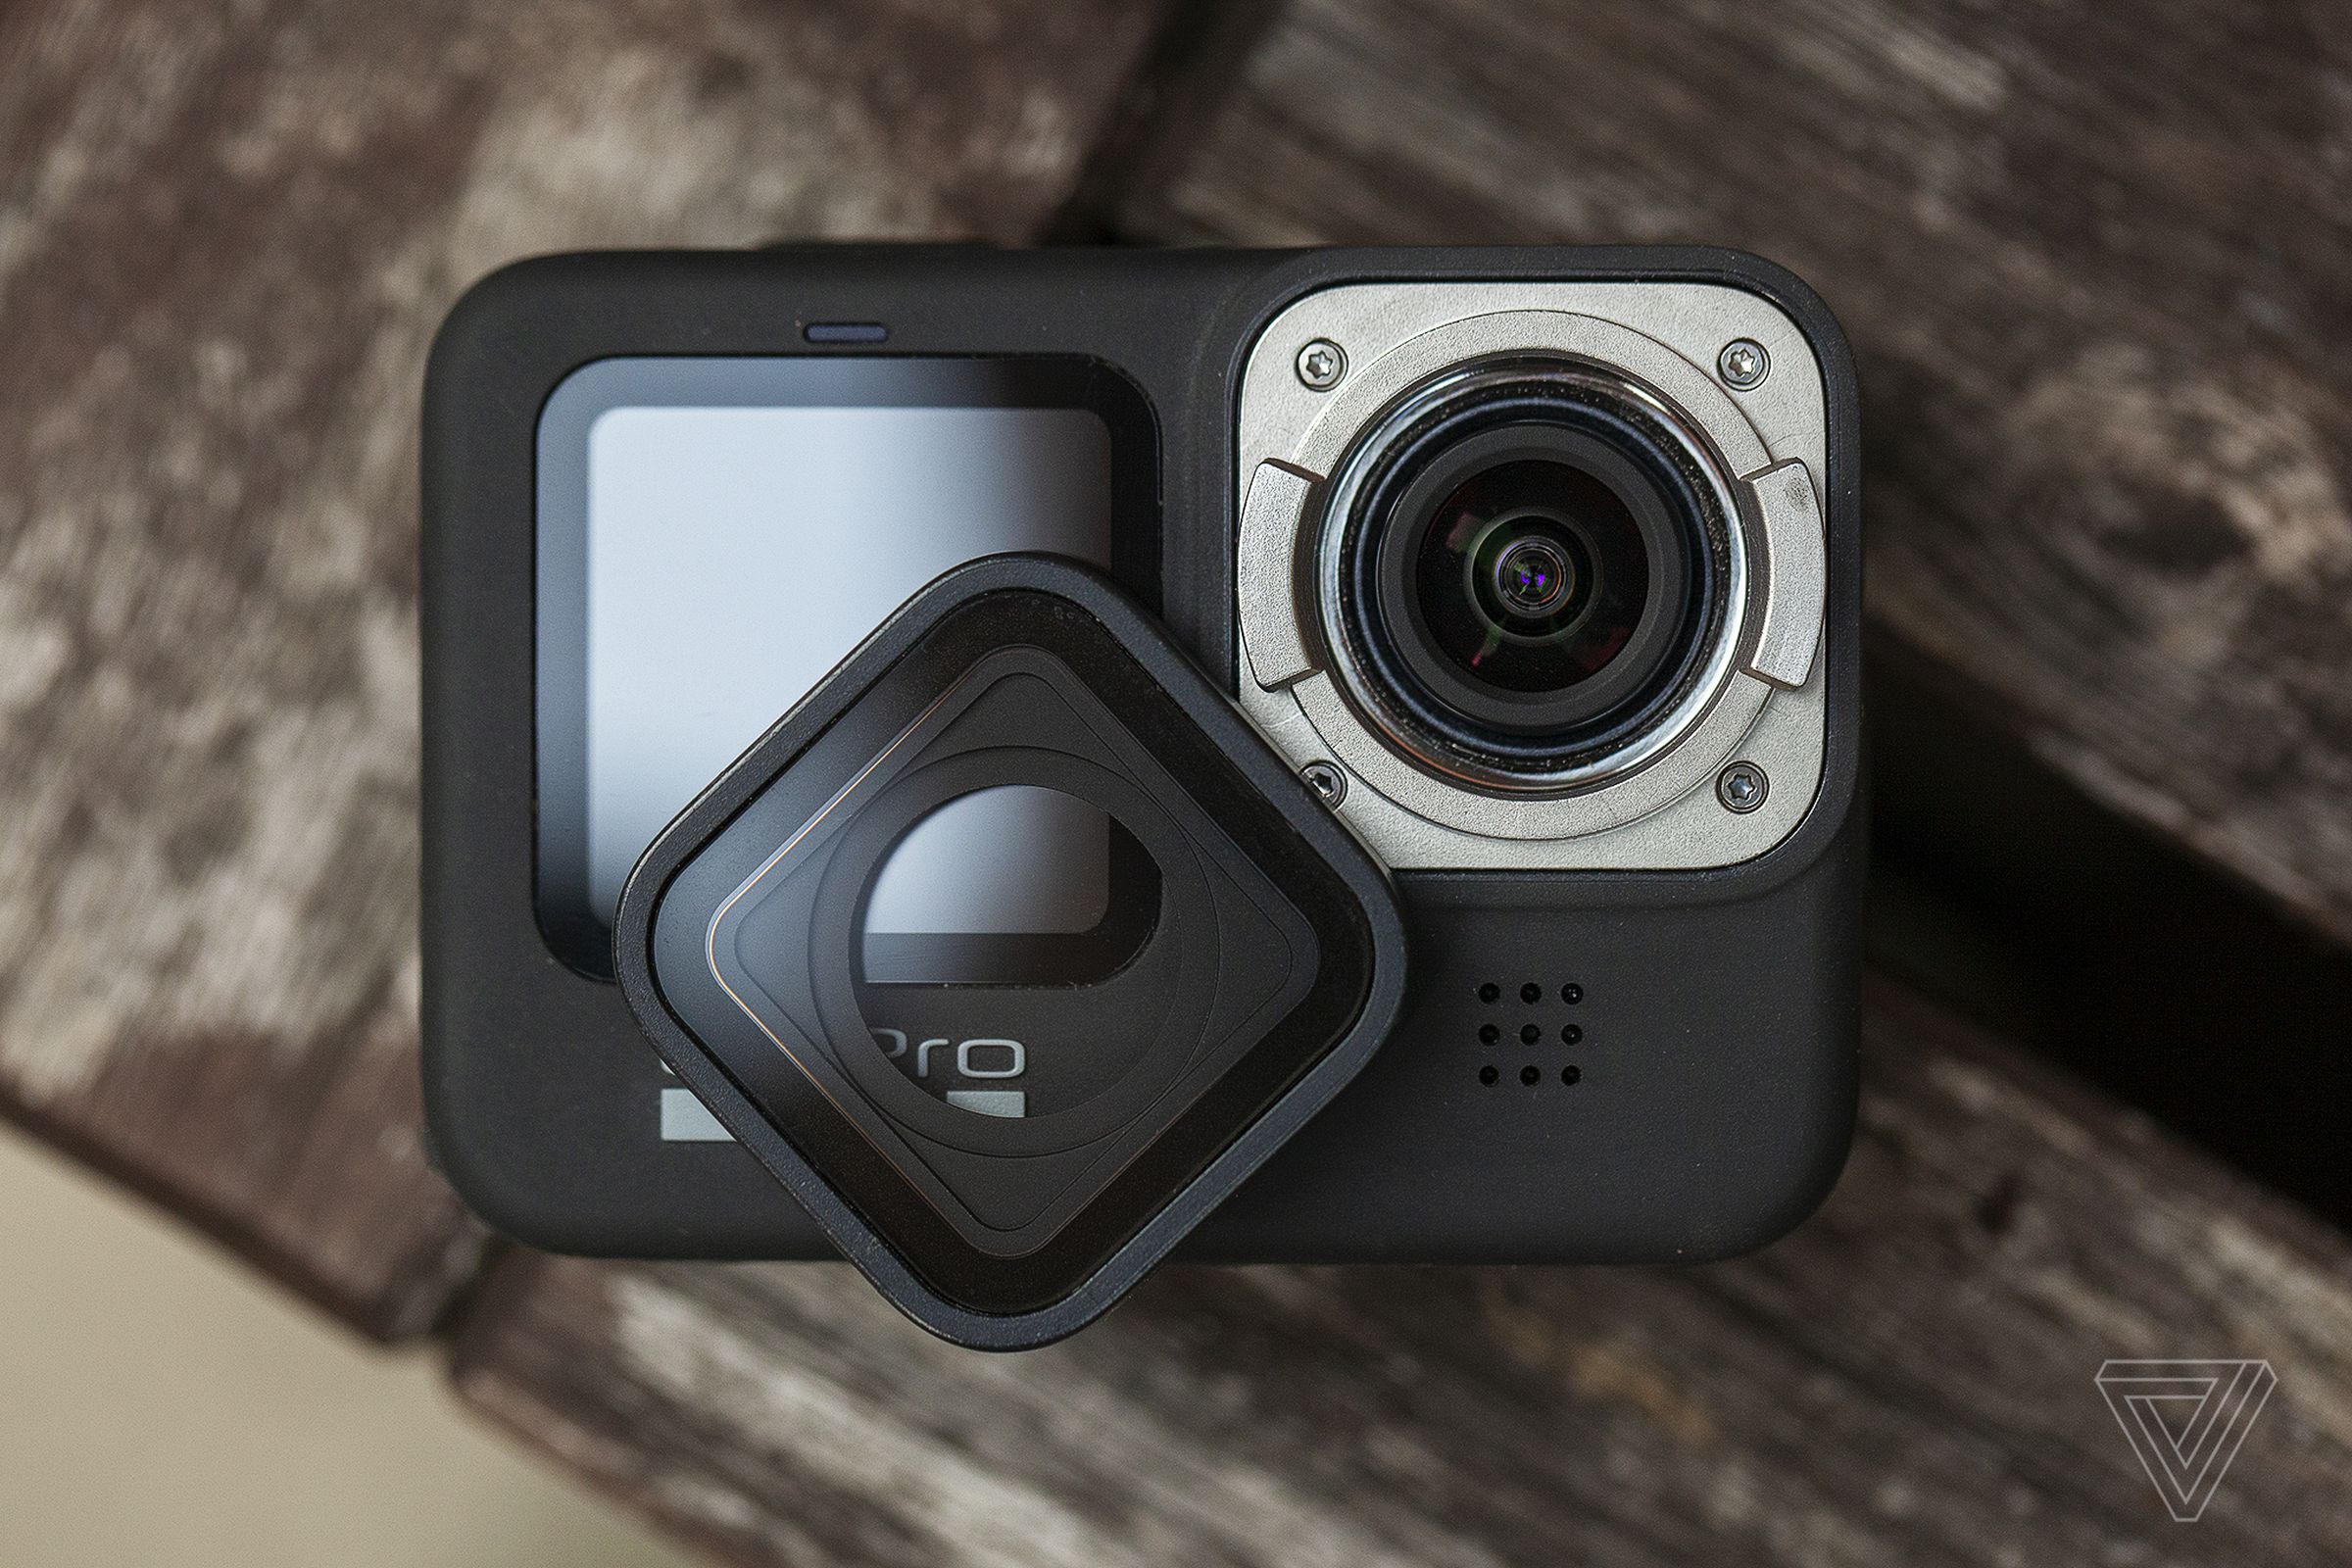 The front lens cover is removable with a twist and a pull.